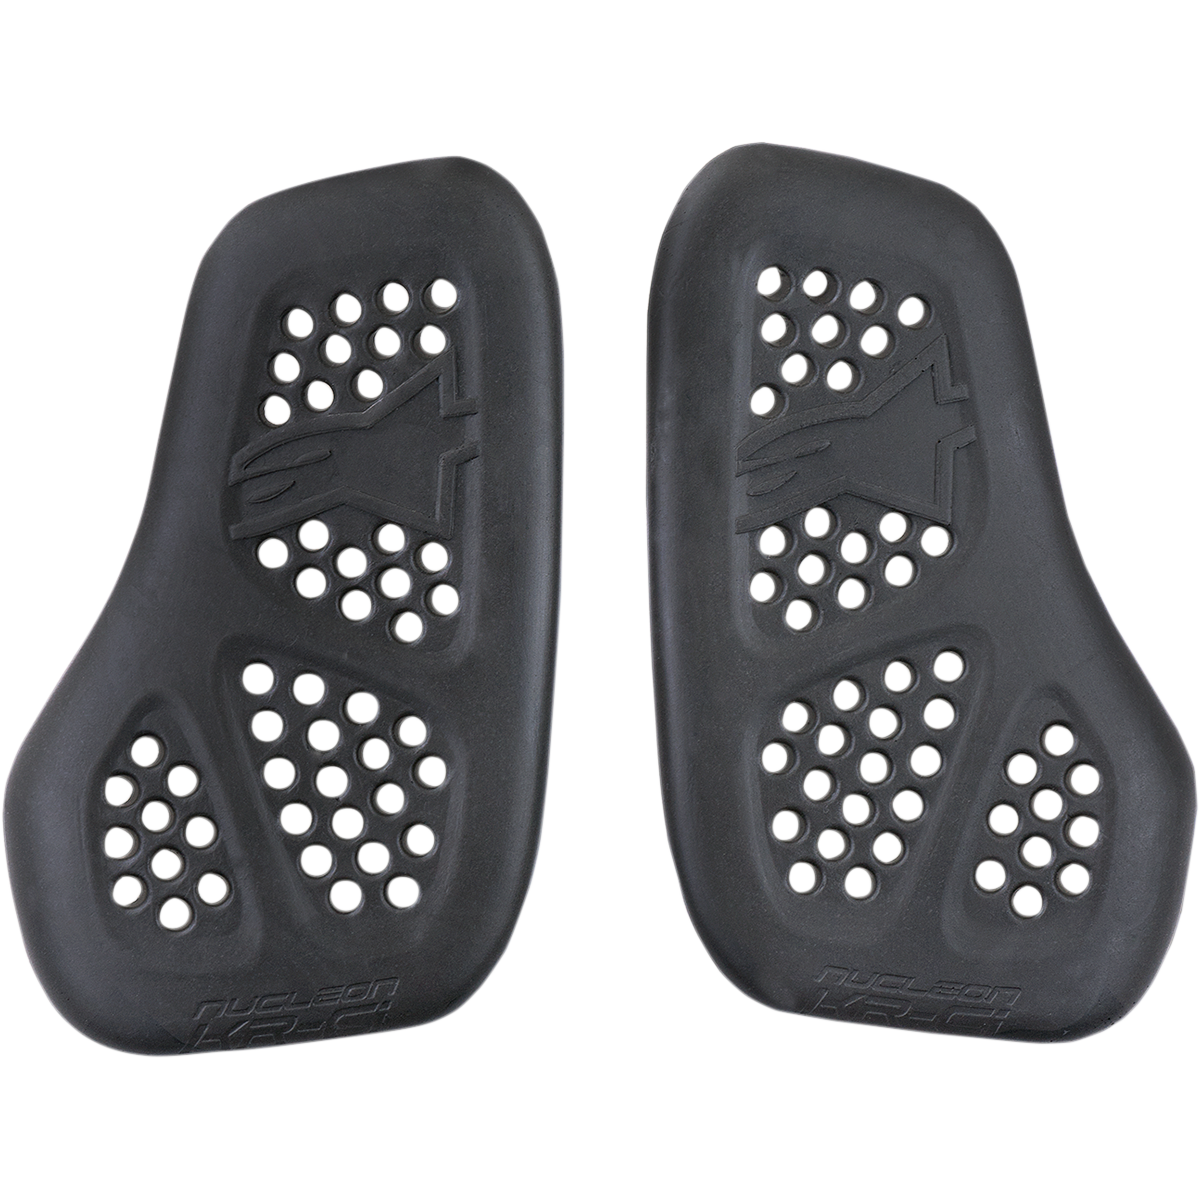 Nucleon KR-Ci Chest Protector Inserts